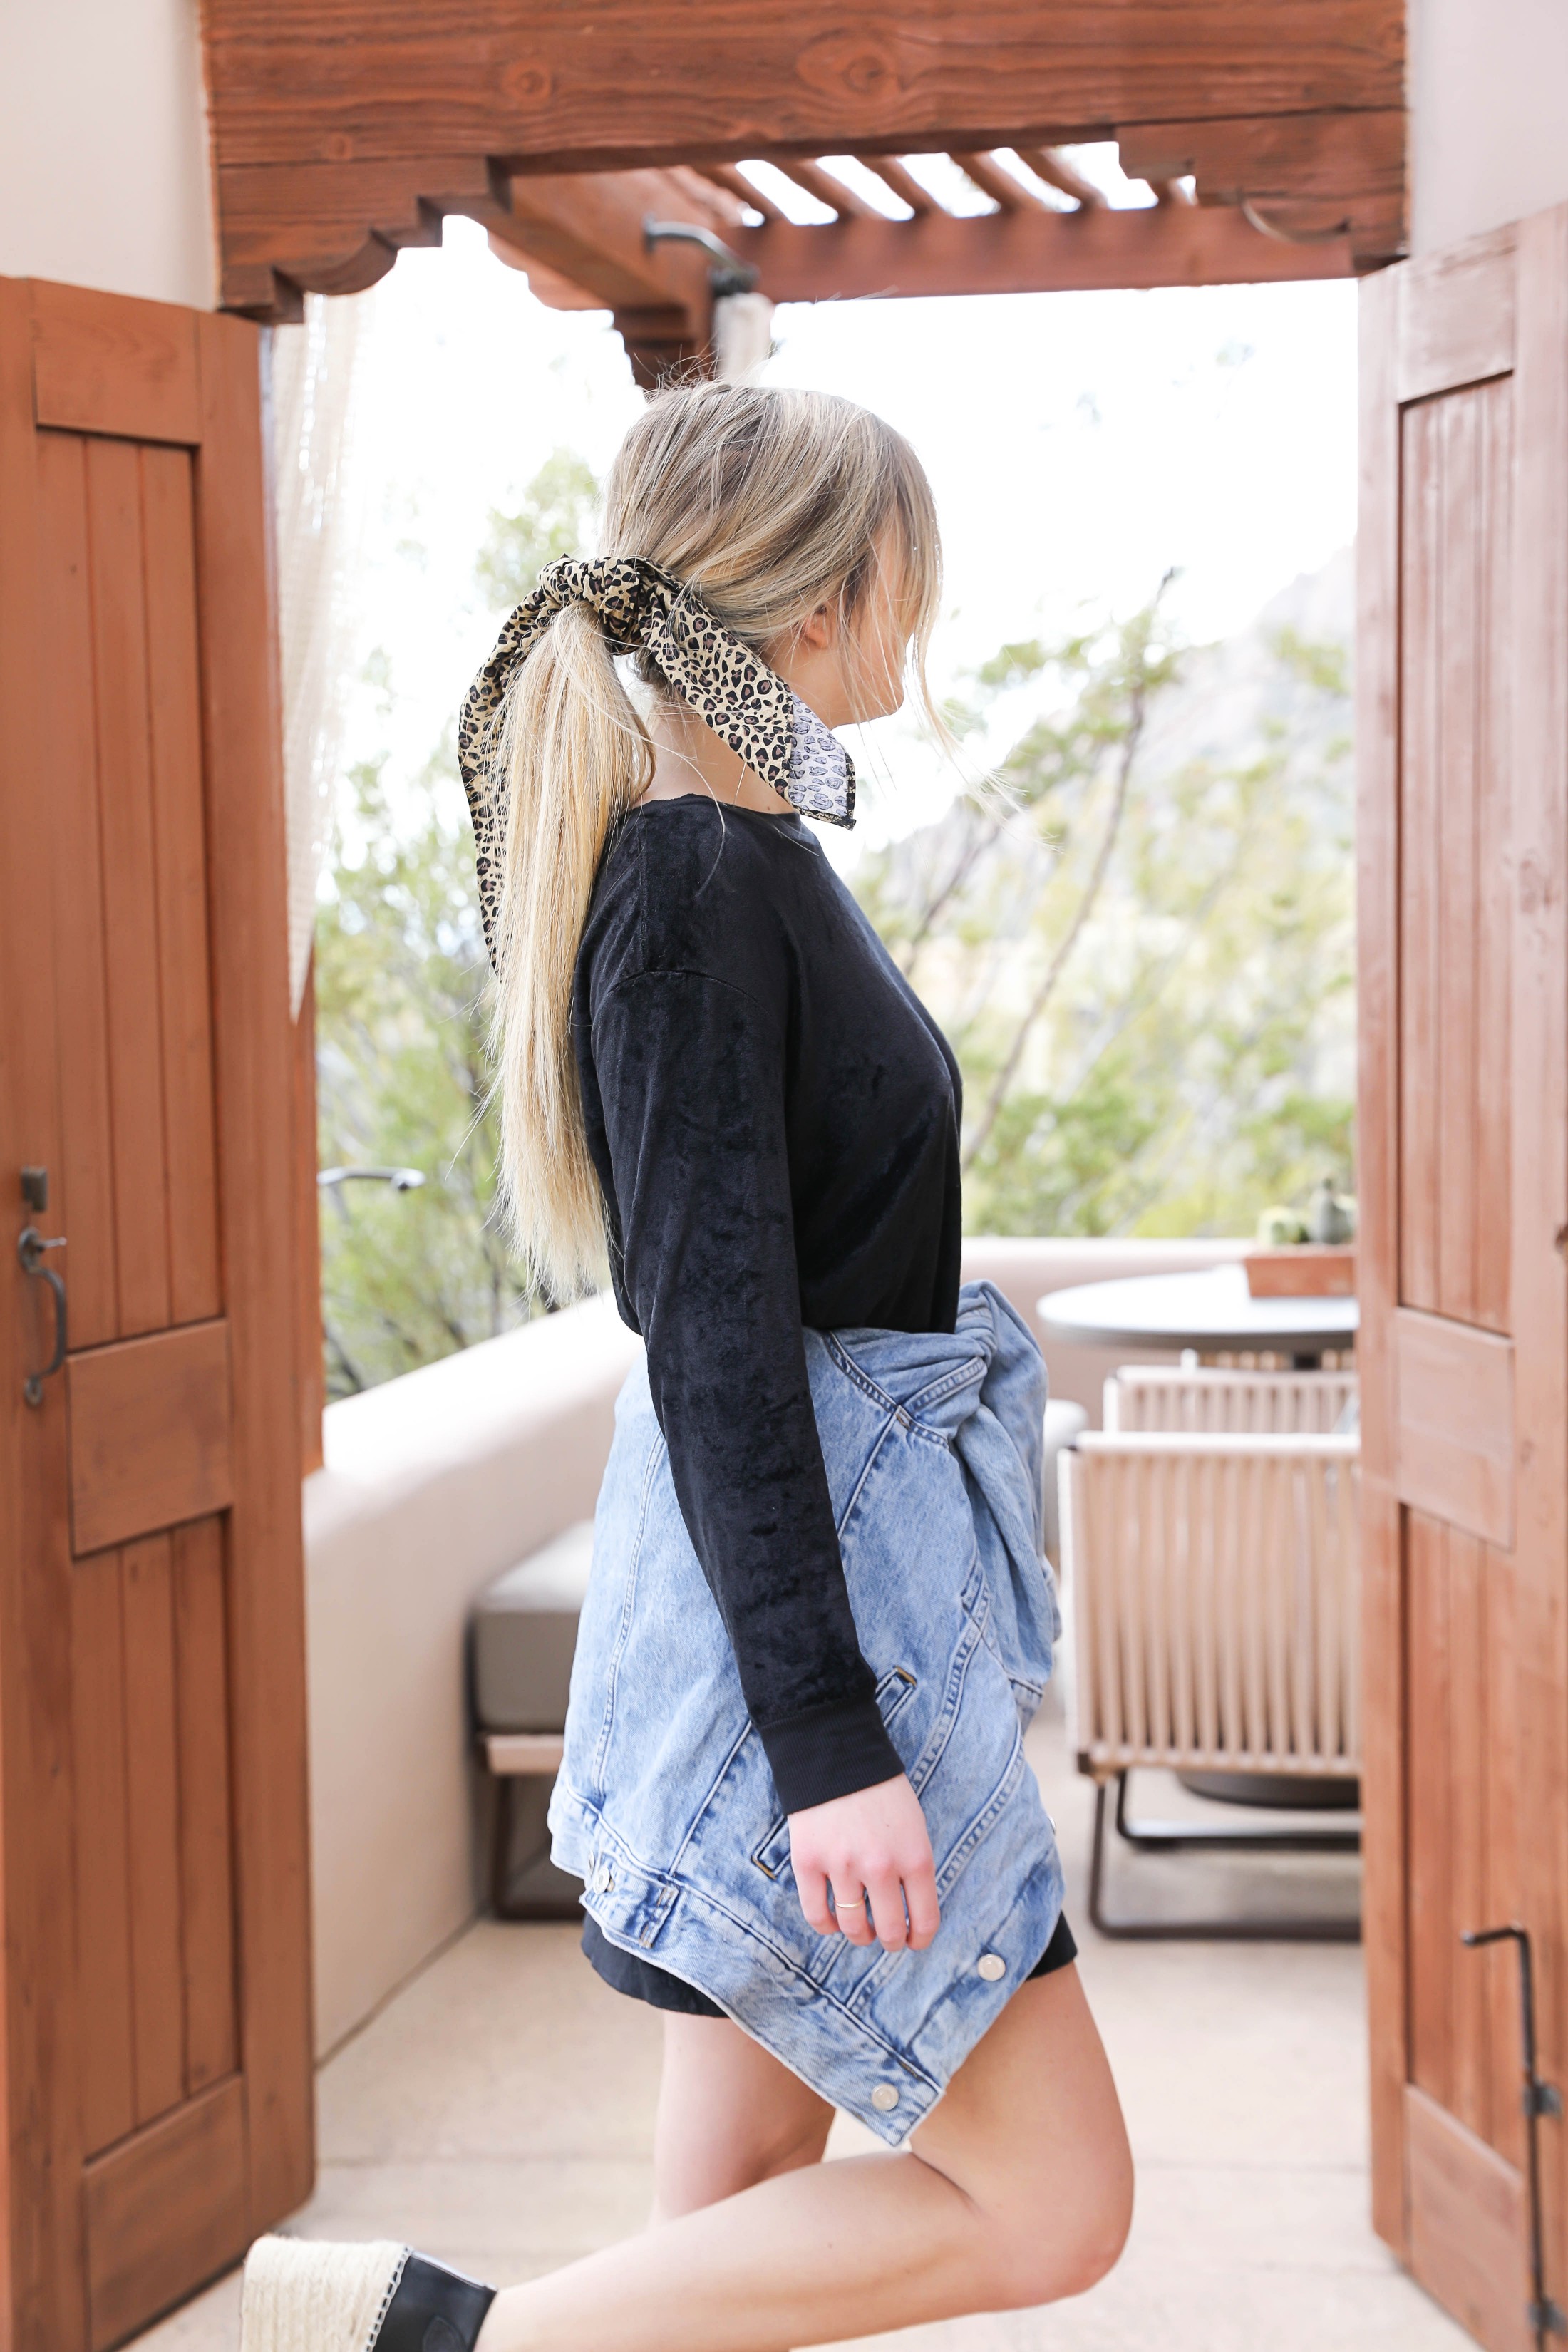 How to style sweatshirt dresses! Casual to dressy! I paired them with leopard hair ties, denim jackets, gucci belts, and more! I love these velour/velvet dress! Details on fashion blog daily dose of charm by lauren lindmark